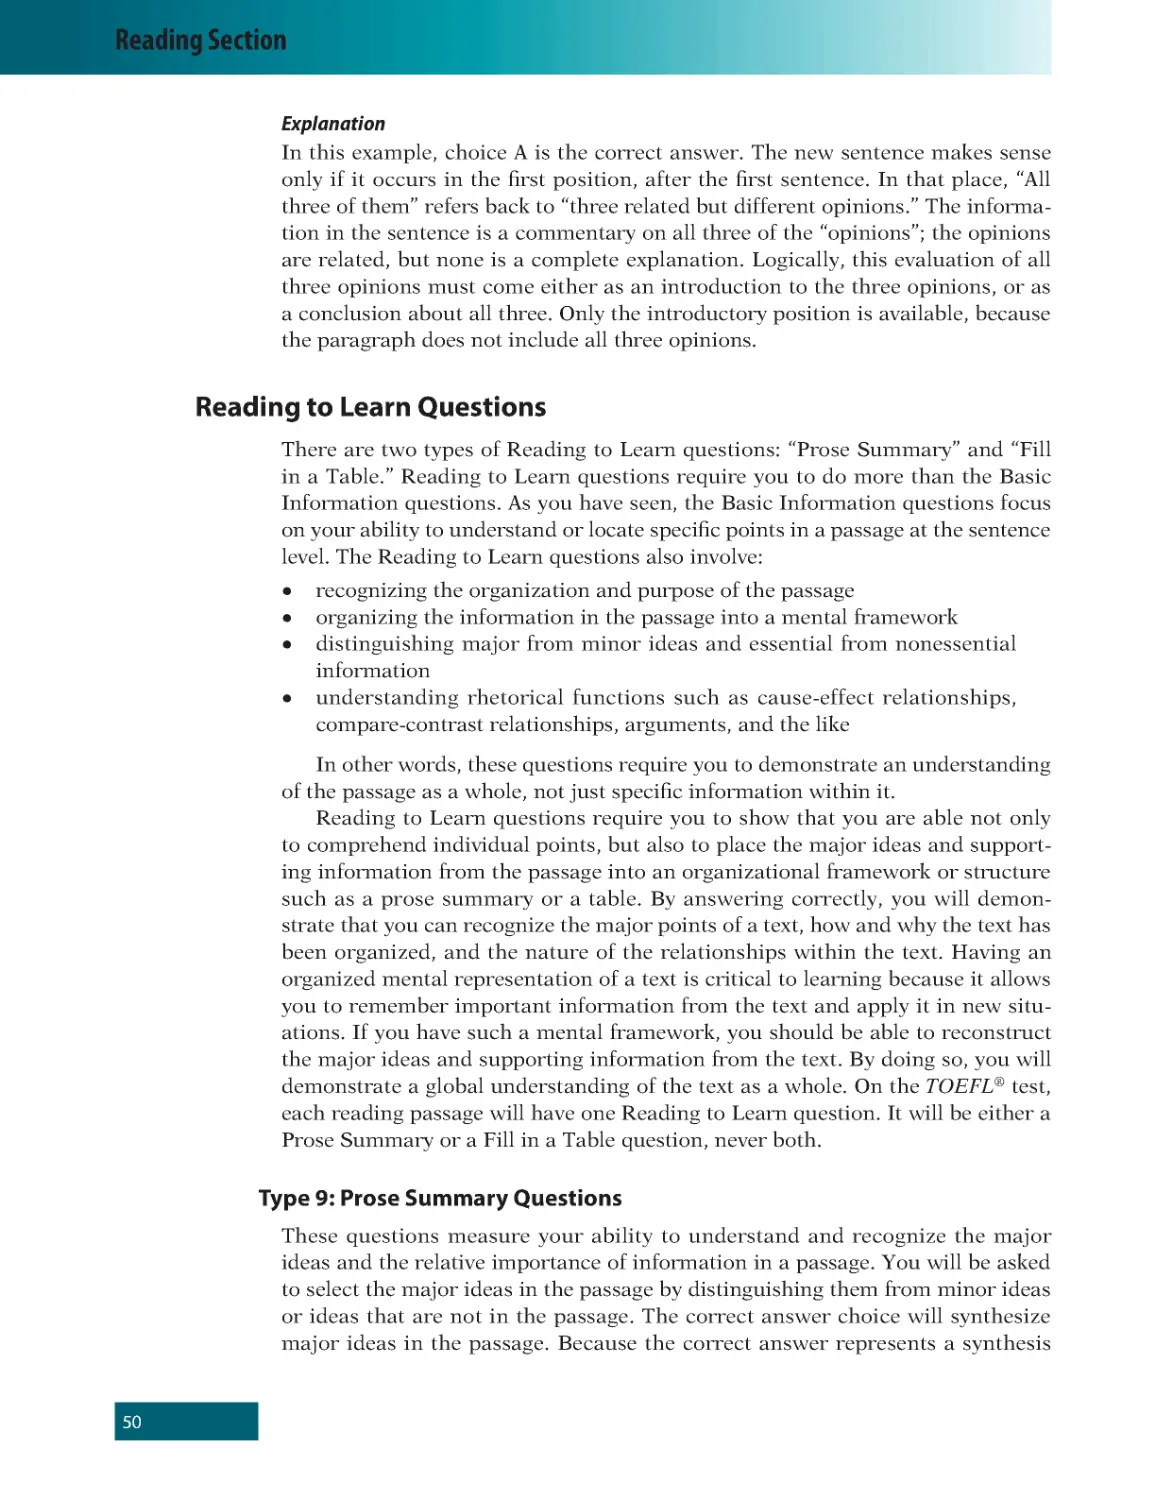 Explanation
Reading to Learn Questions
Type 9: Prose Summary Questions